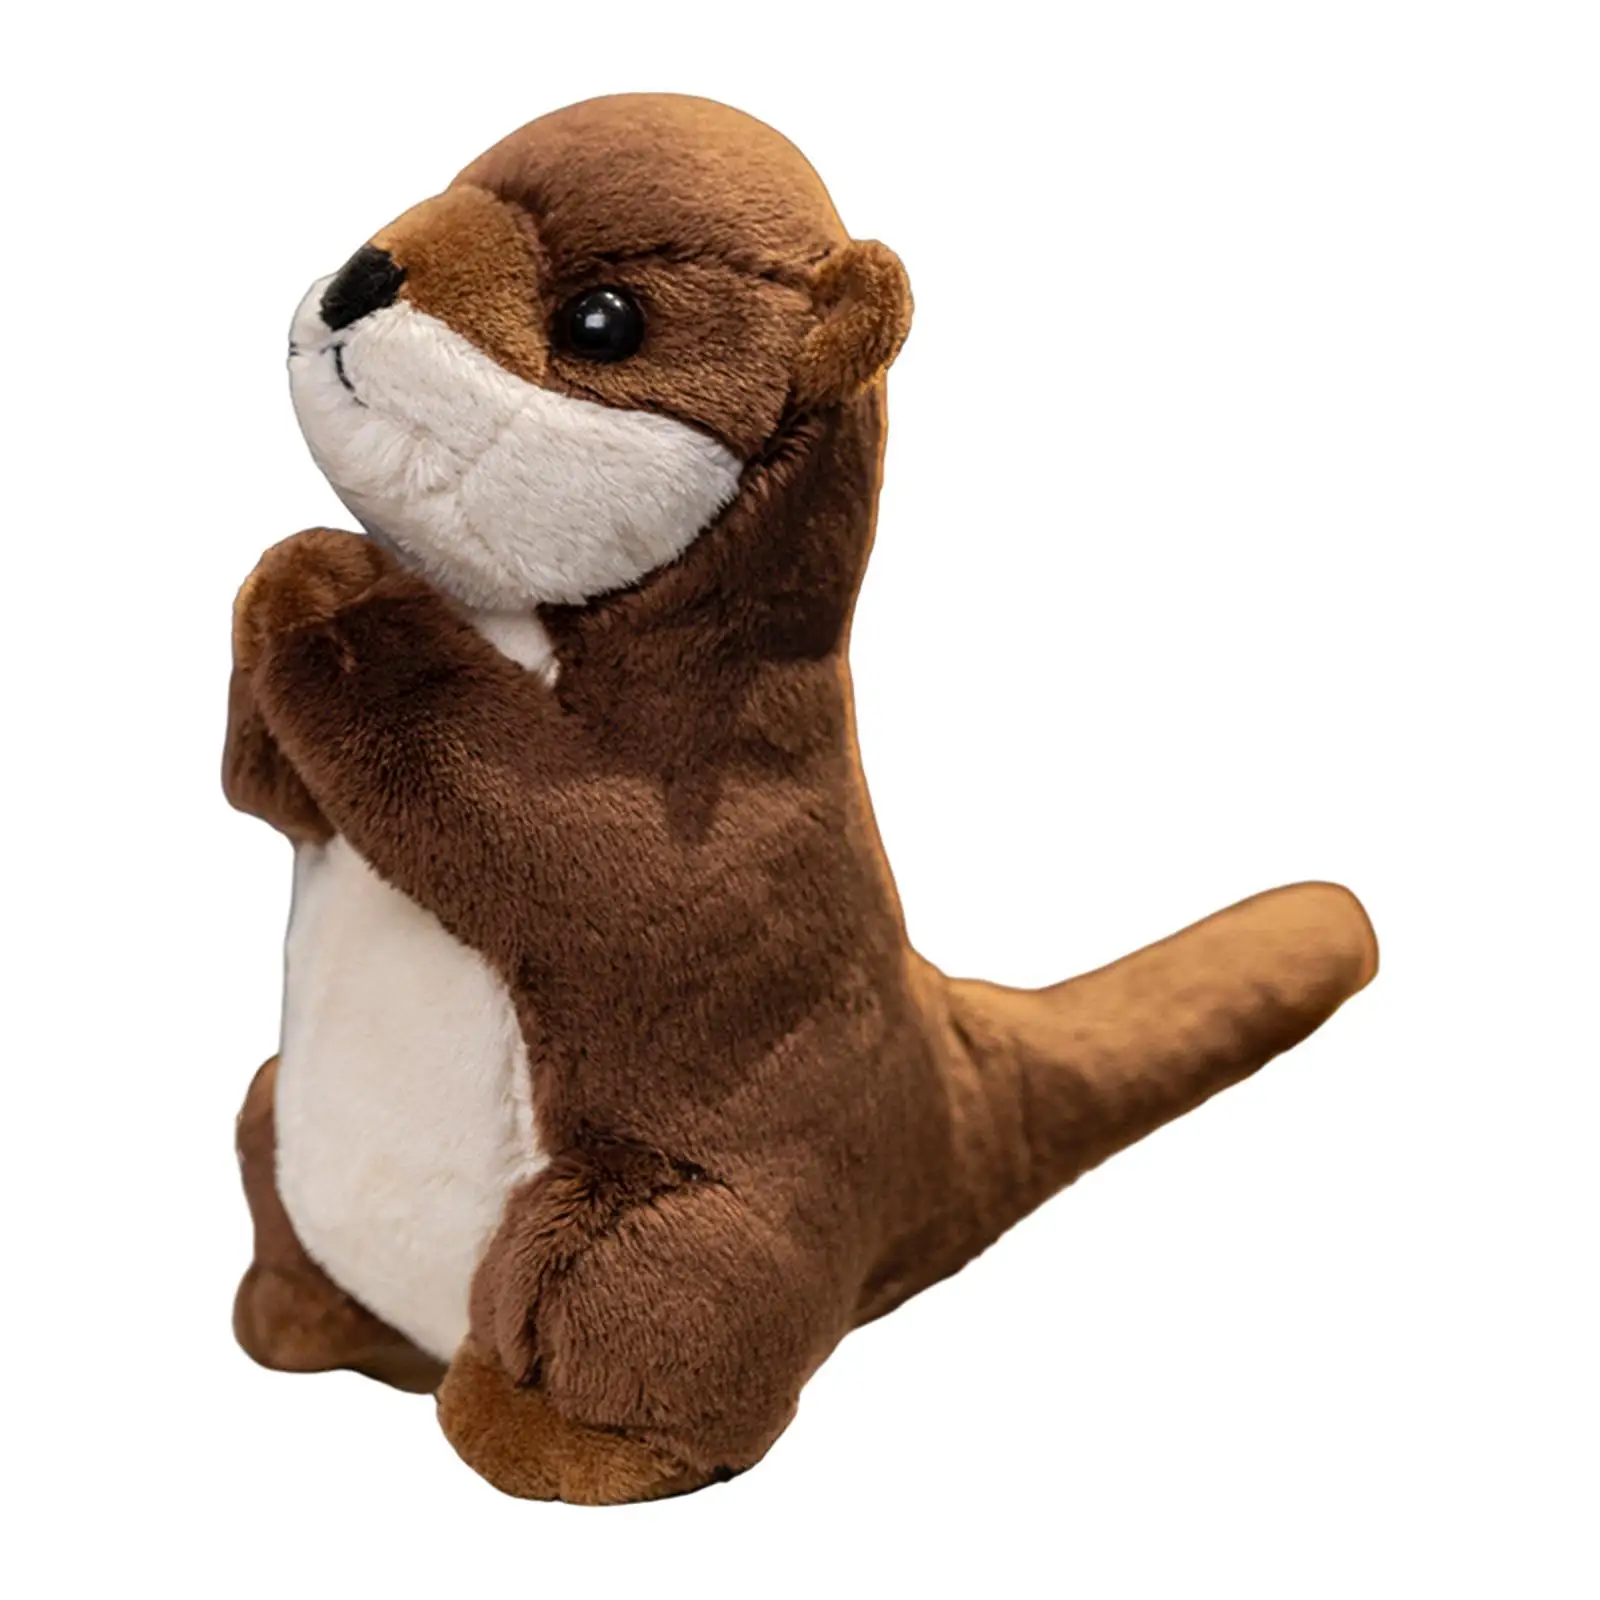 Cute Otter Plush Toys 19cm Cuddly Party Favors Photo Props Creative Gifts Sofa Ornaments for Boy Girls Kids Teens Children